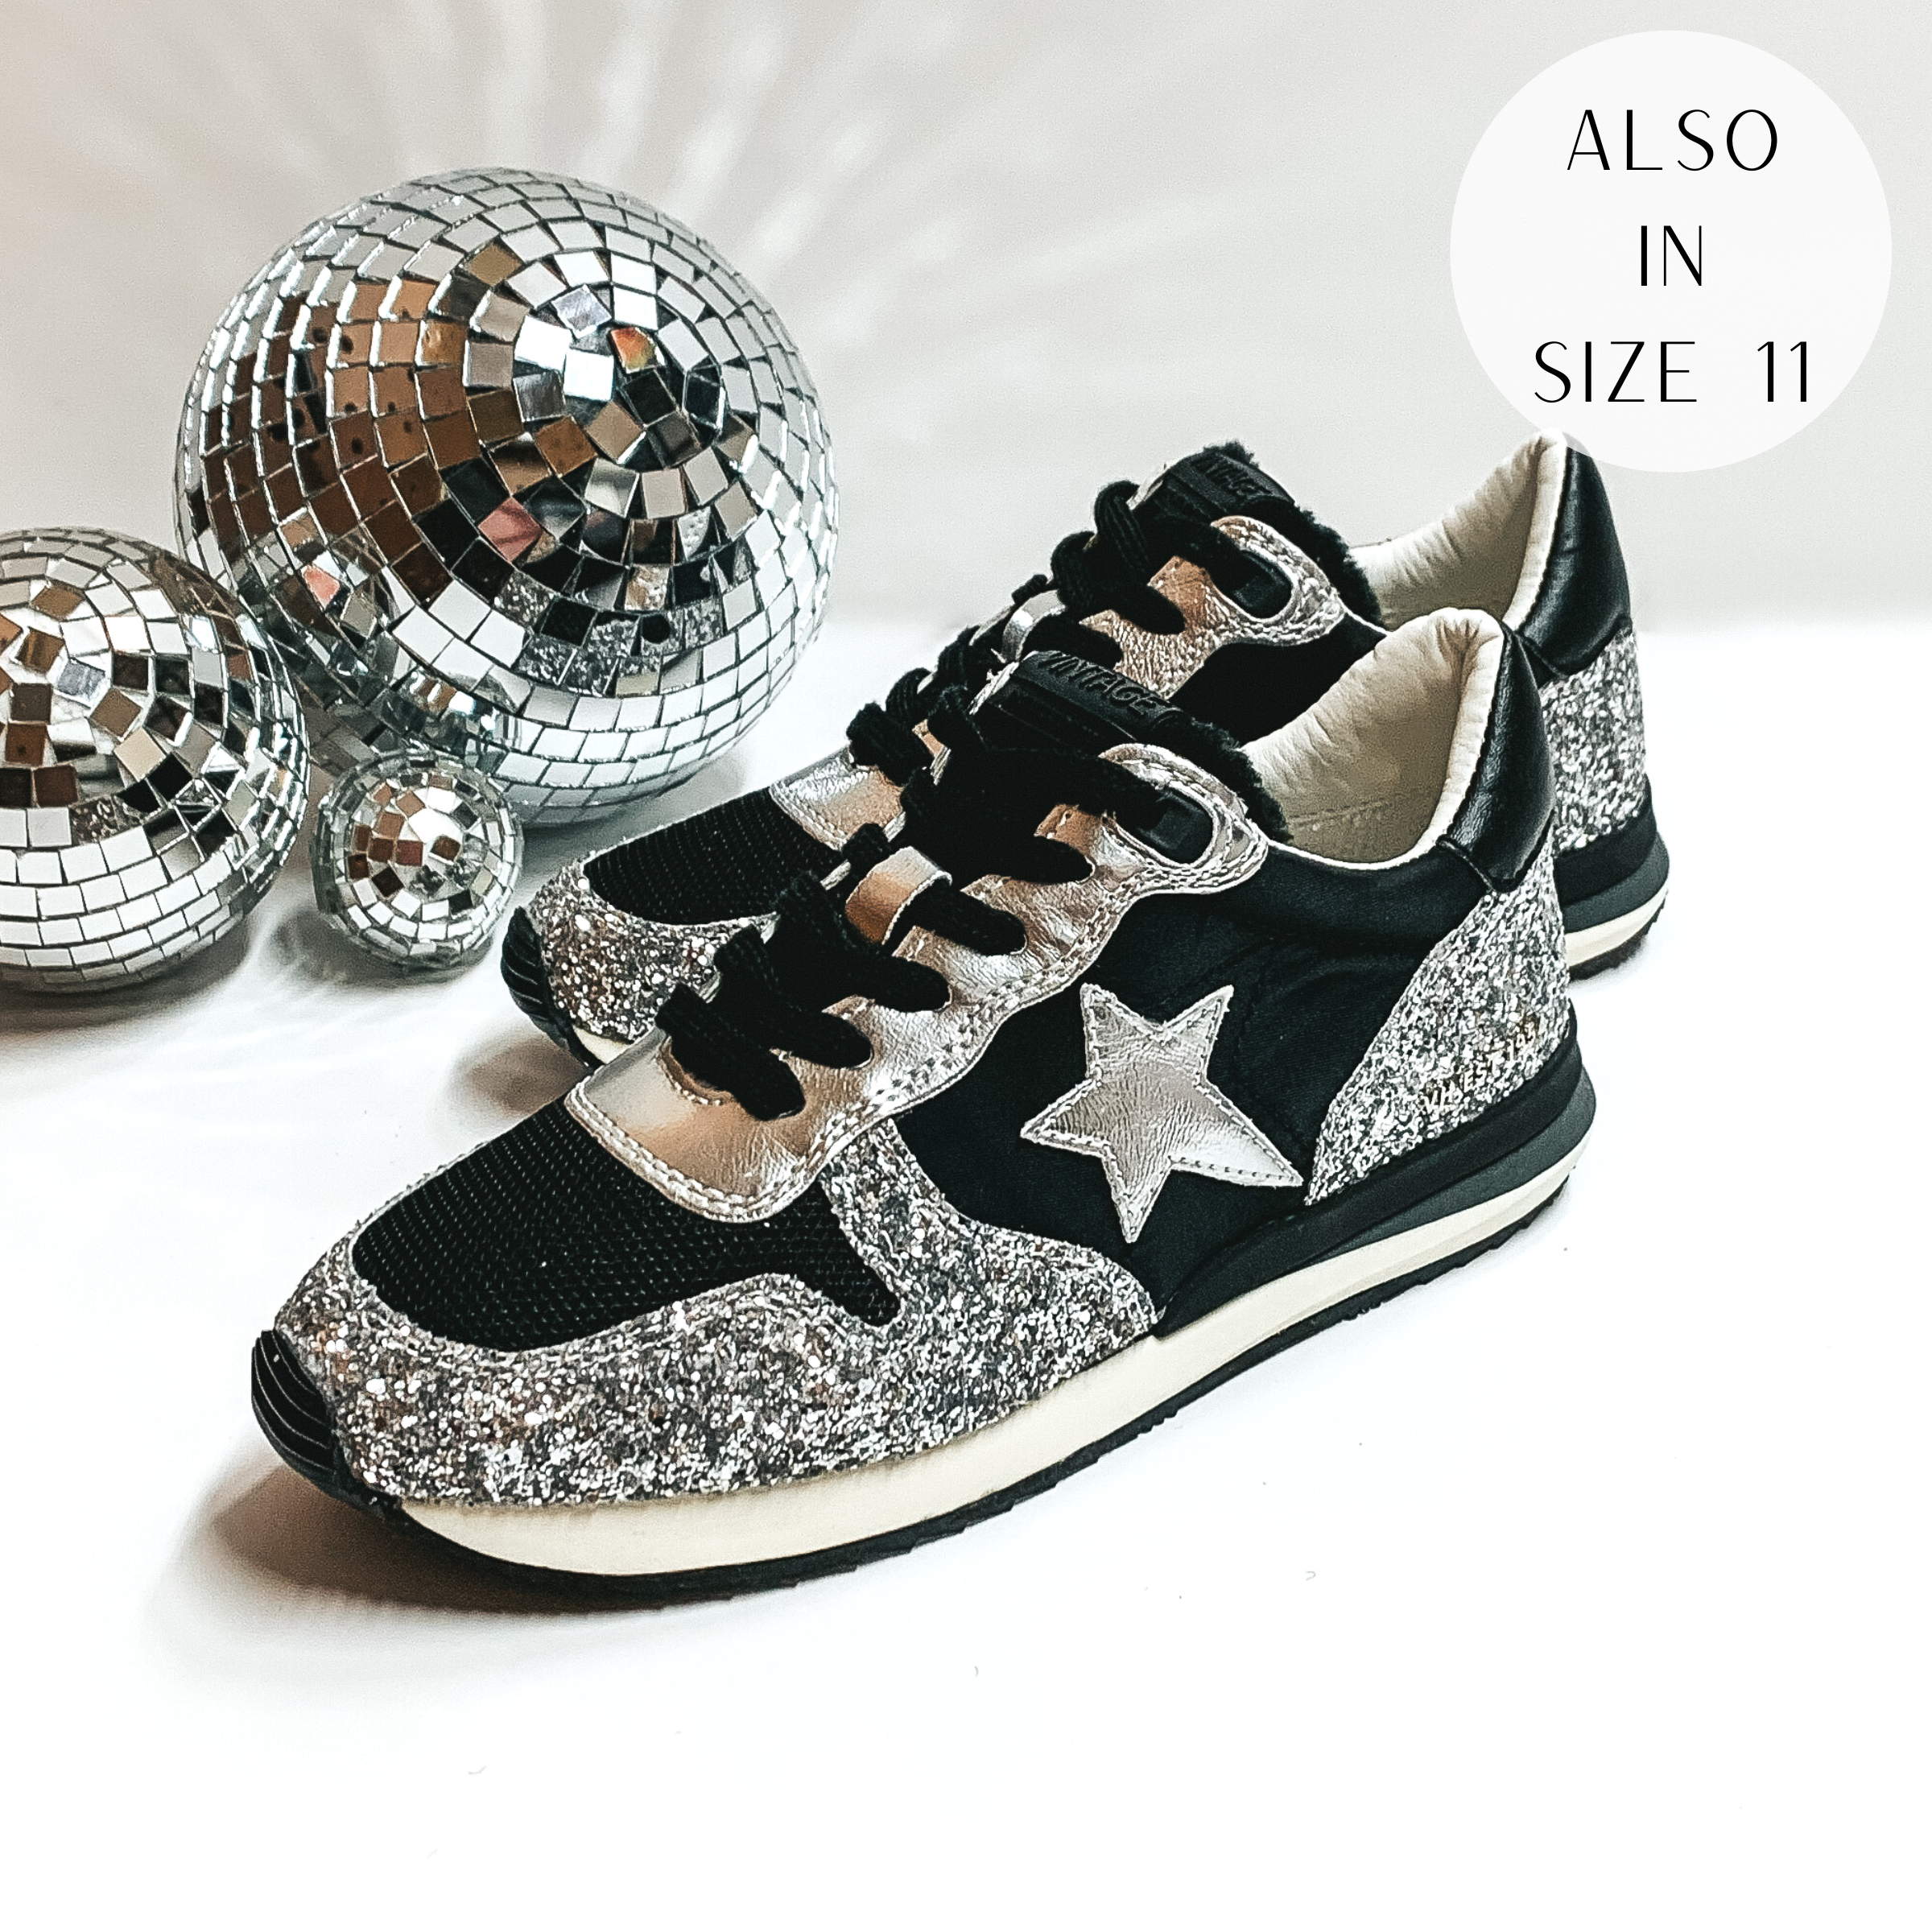 Black tennis shoes with silver glitter patches throughout. These shes also have a silver star emblem and a silver part around the black laces. These shoes are pictured on a white background with disco balls on the left hand side.